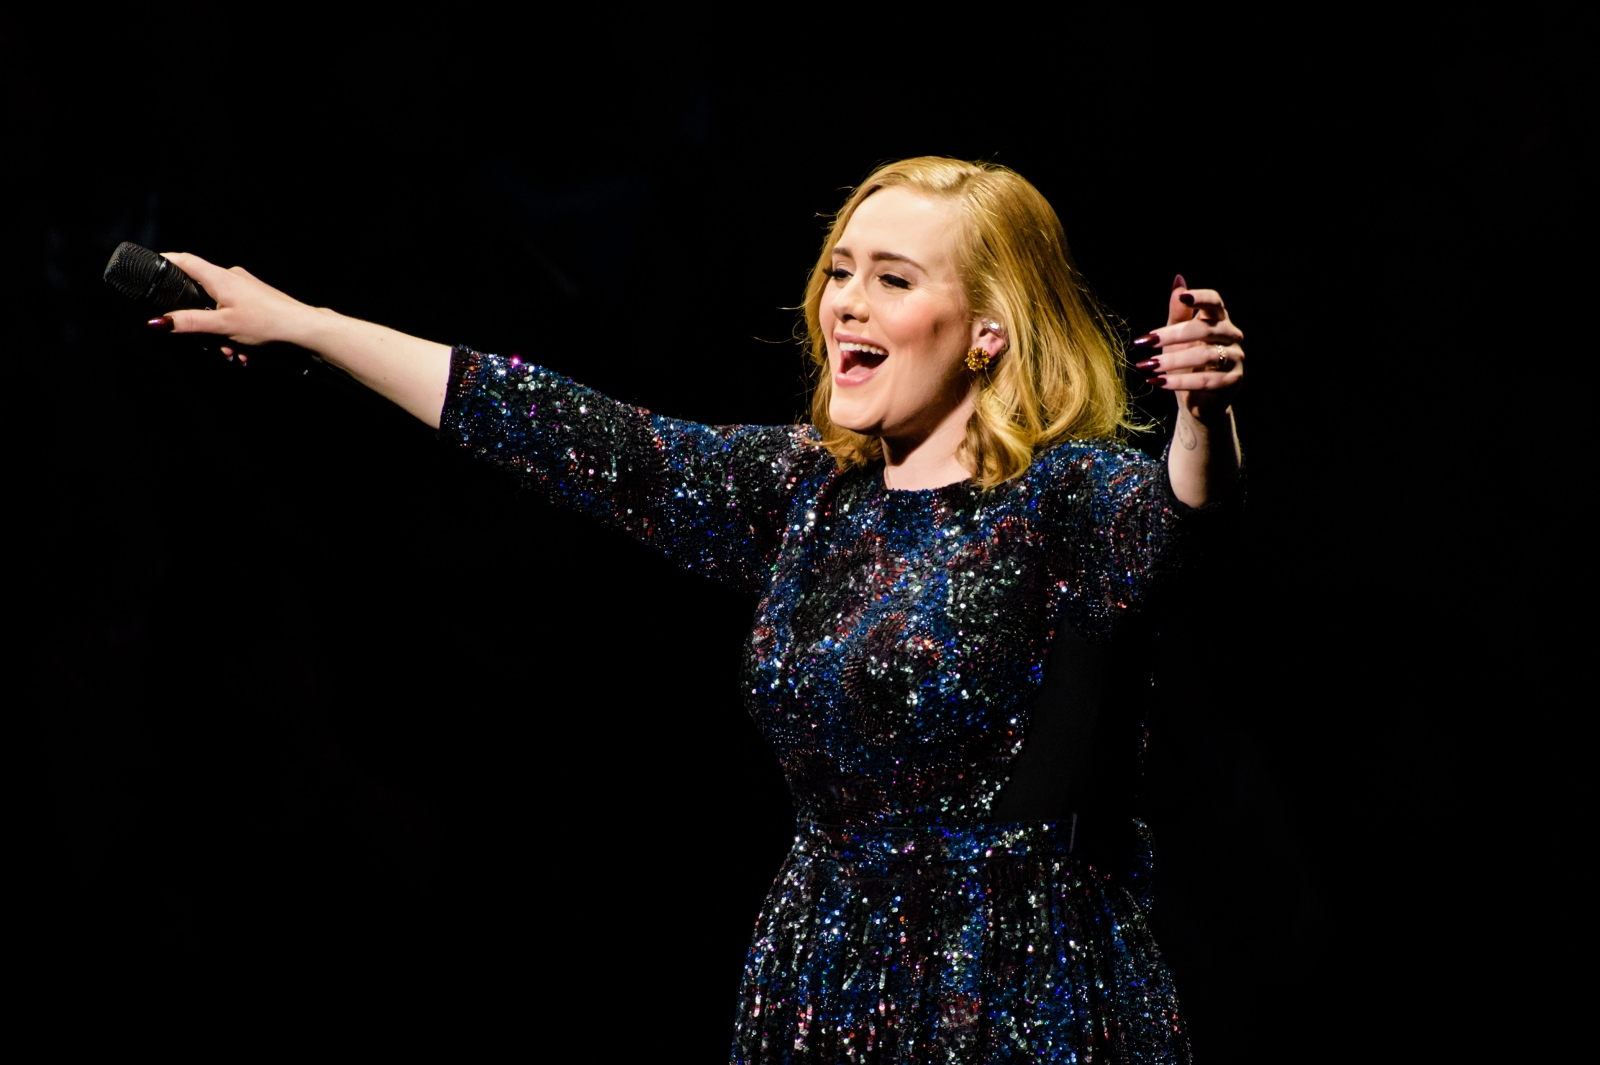 Adele announces New Zealand tour dates for Adele Live